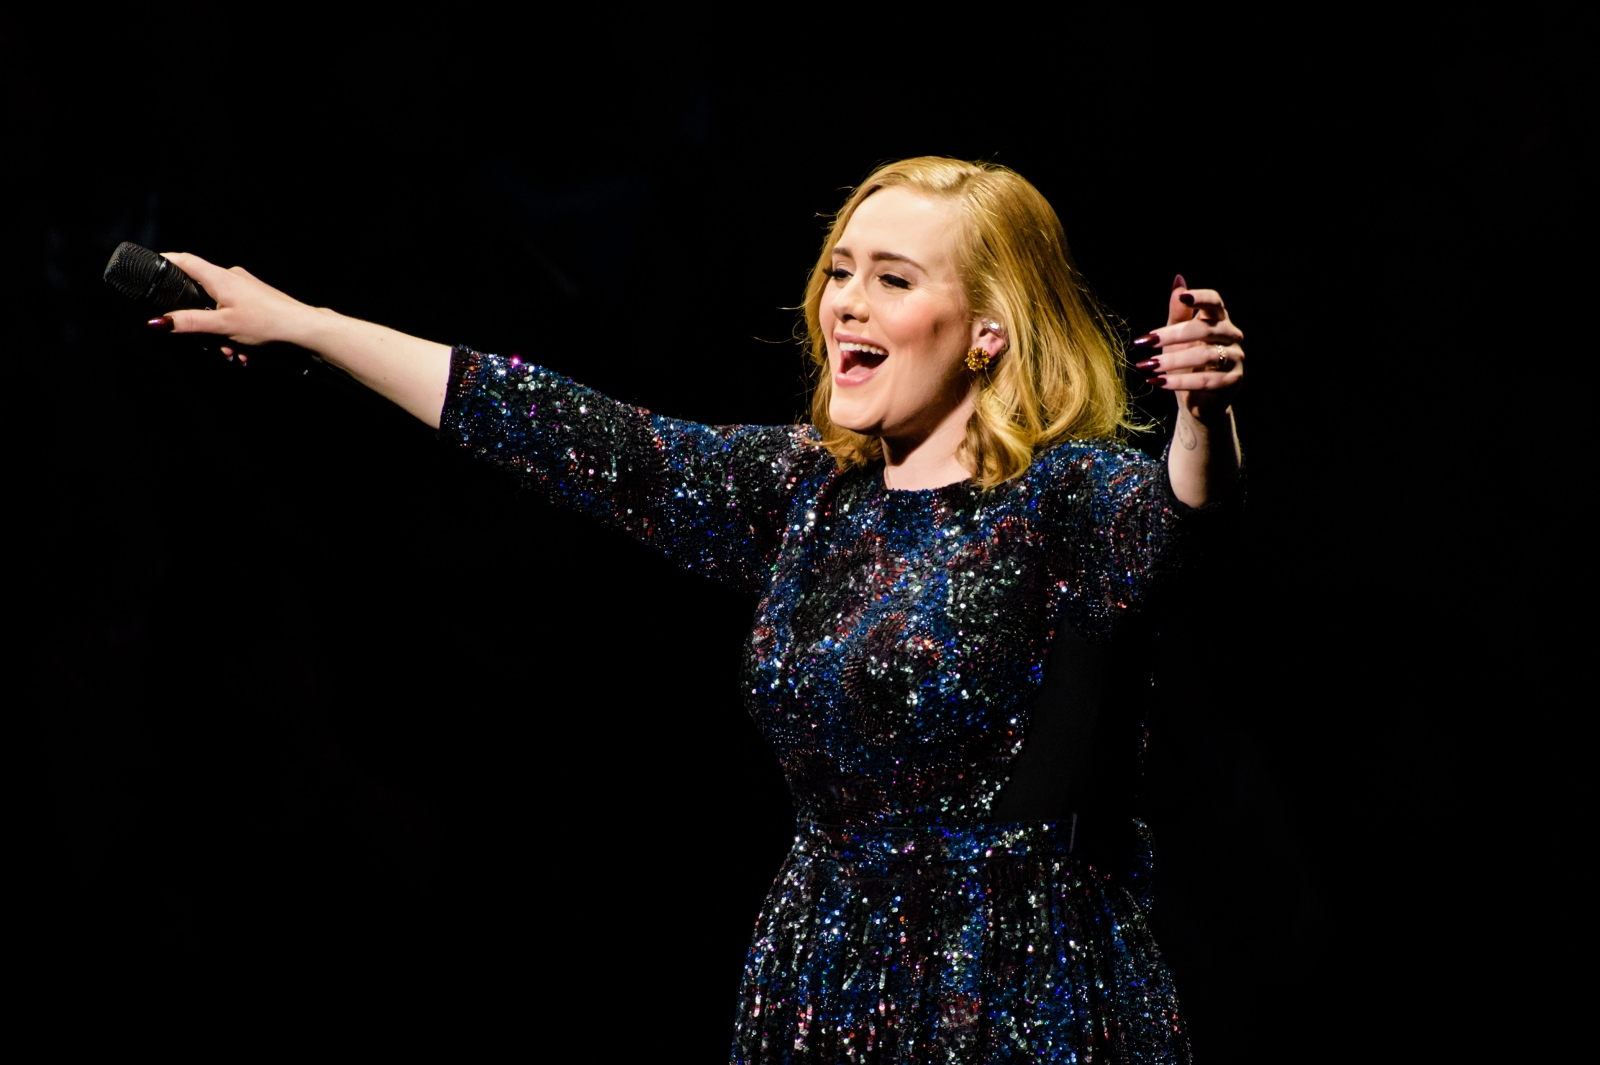 Adele announces New Zealand tour dates for Adele Live